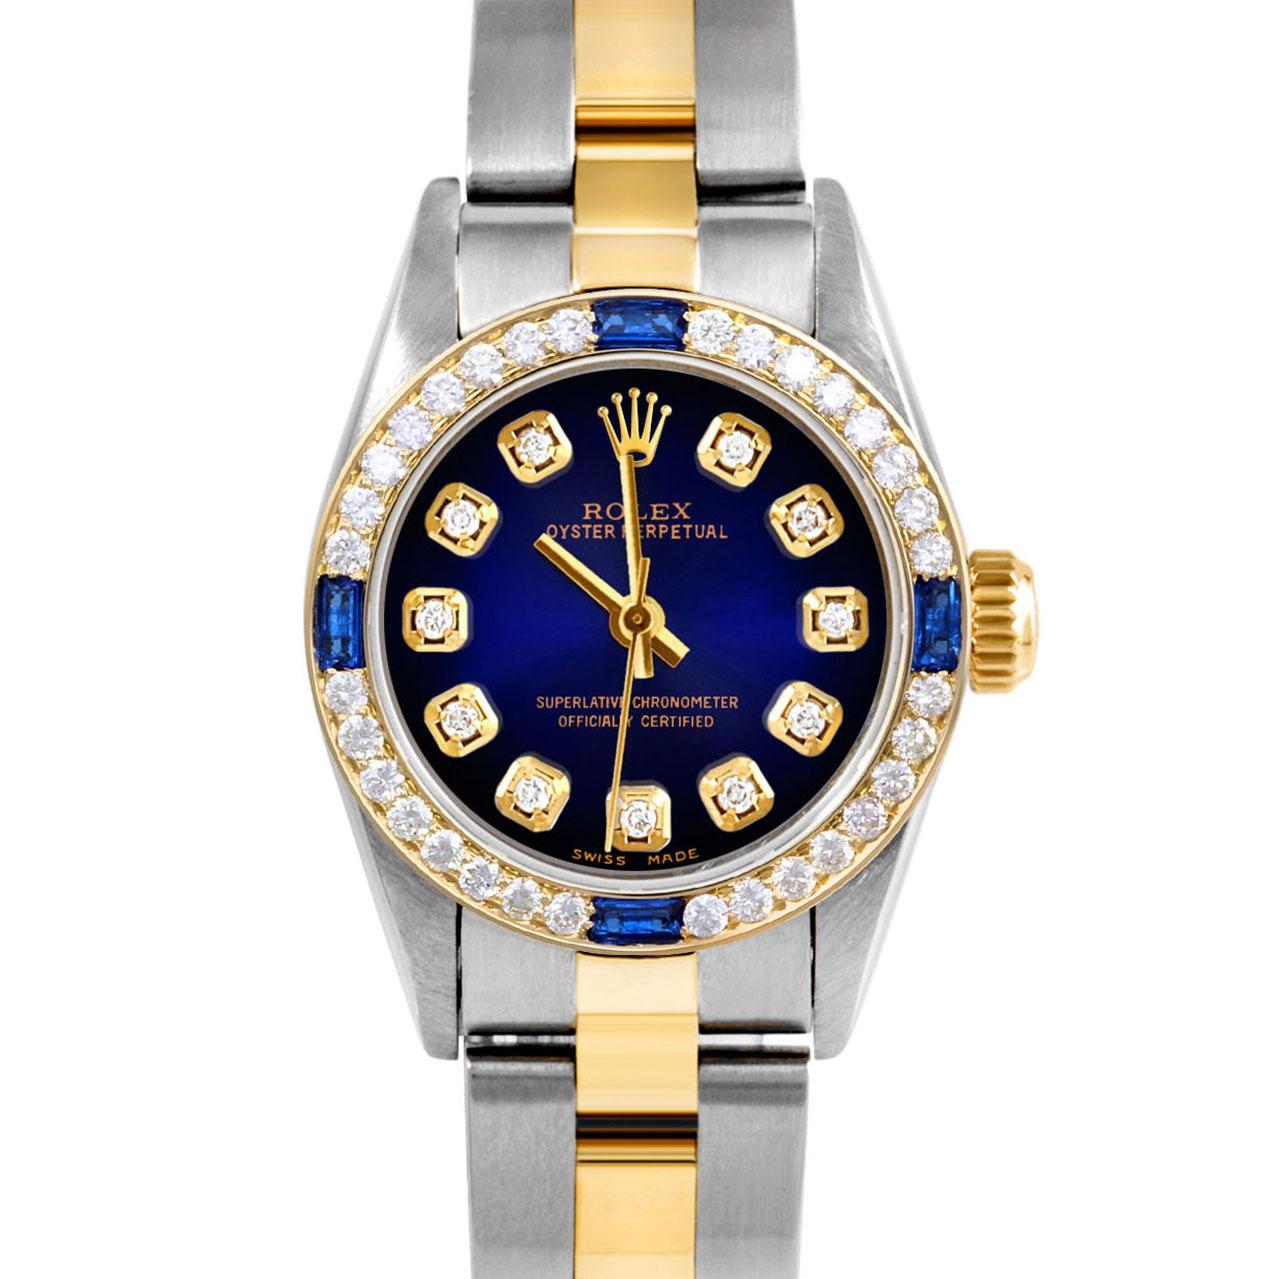 Brand : Rolex
Model : Oyster Perpetual 
Gender : Ladies
Metals : 14K Yellow Gold / Stainless Steel
Case Size : 24 mm

Dial : Custom Blue Vignette Diamond Dial (This dial is not original Rolex And has been added aftermarket yet is a beautiful Custom